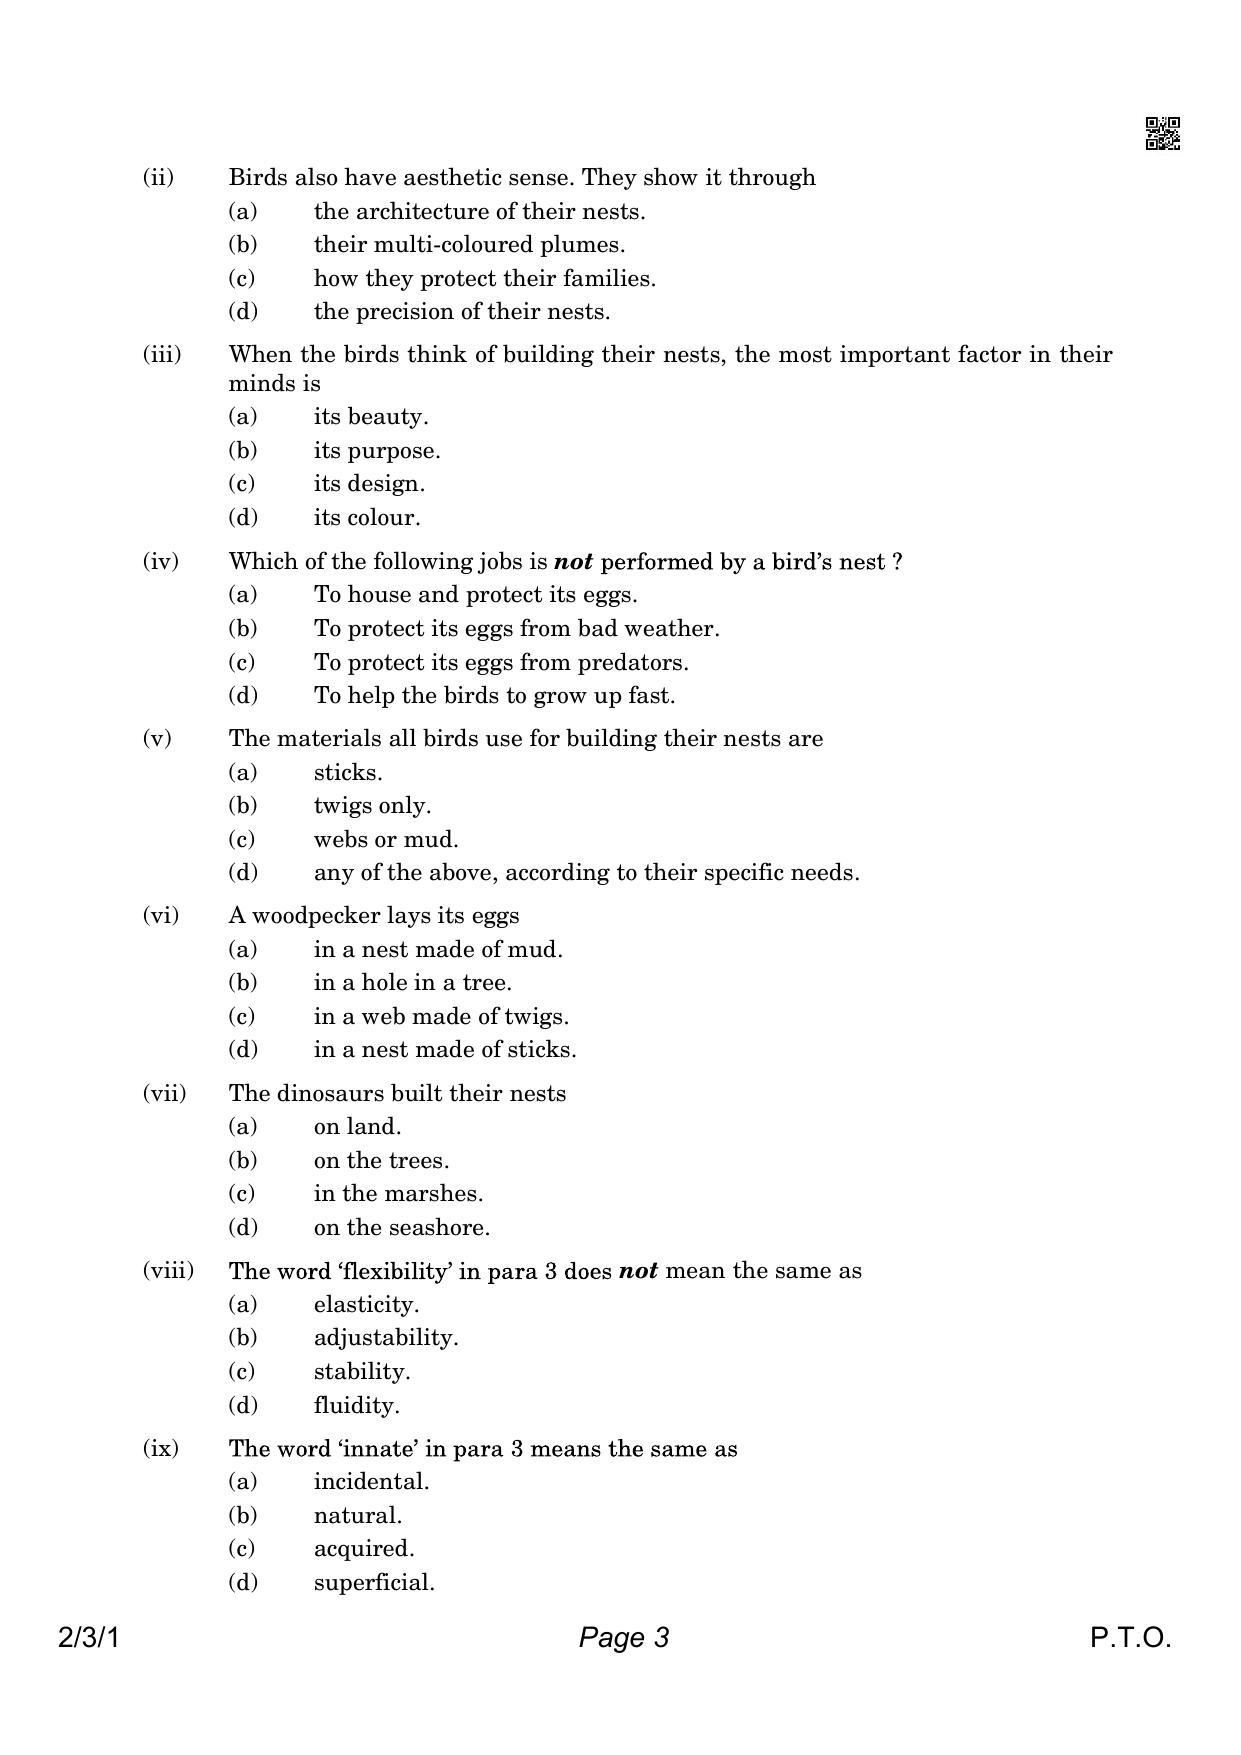 CBSE Class 10 QP_184_ENGLISH_LANGUAGE_AND_LITERATURE 2021 Compartment Question Paper - Page 3